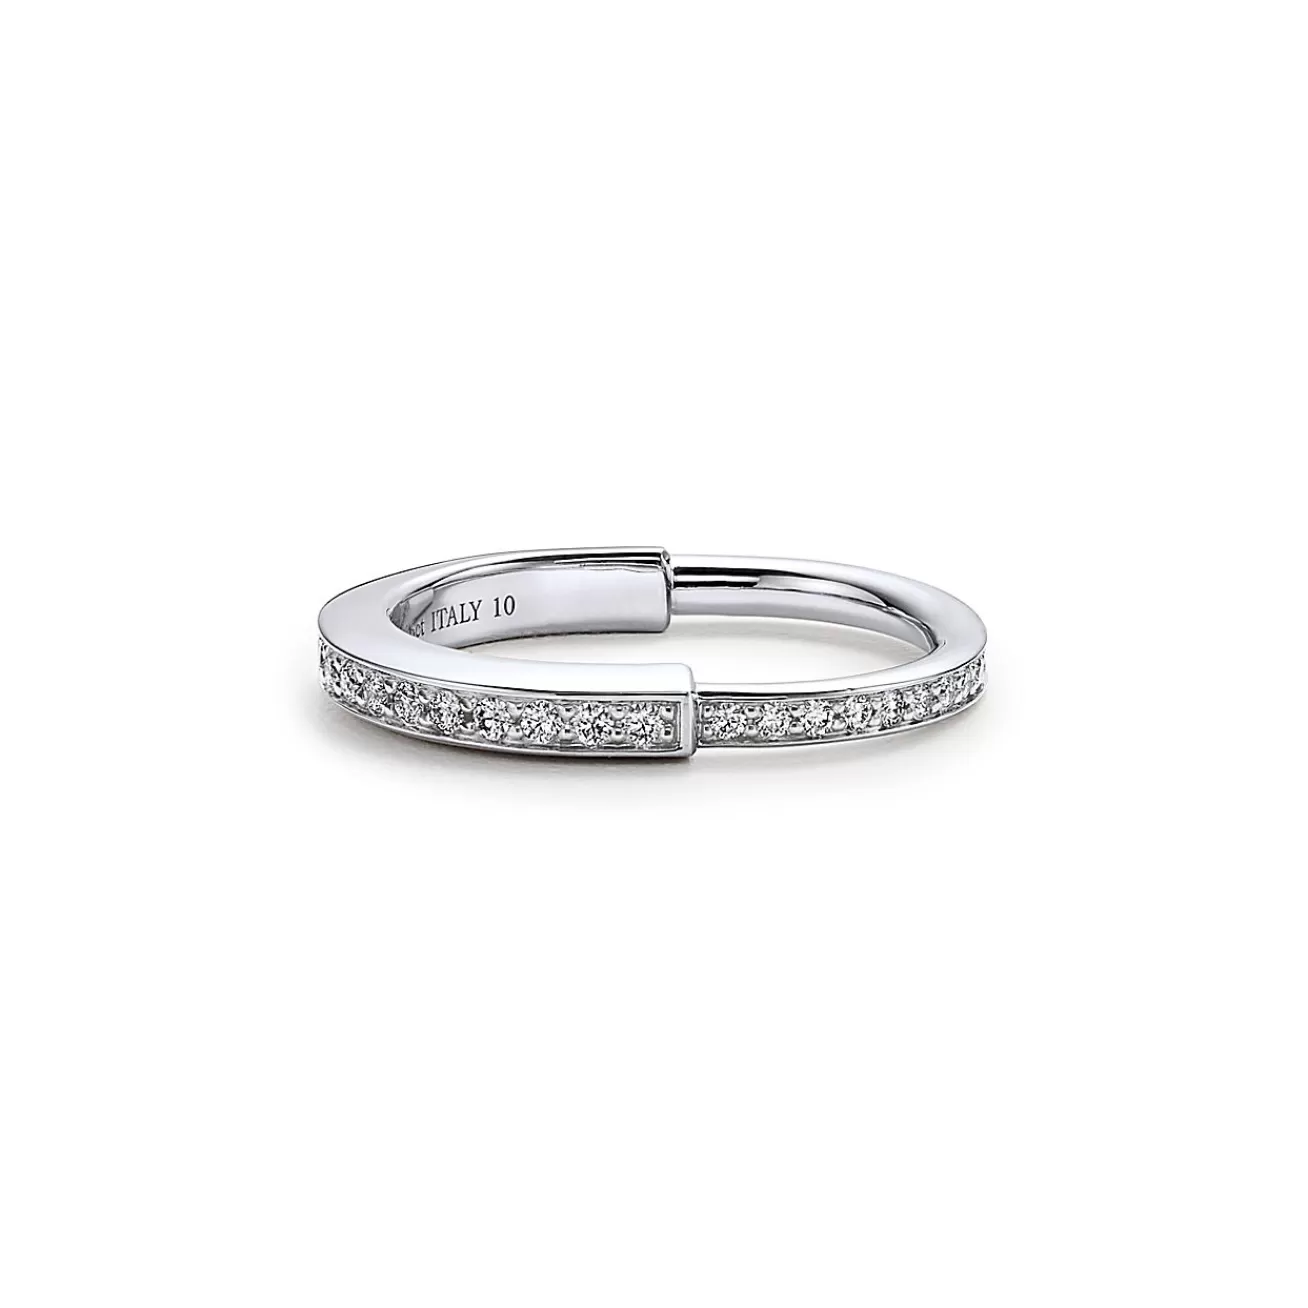 Tiffany & Co. Tiffany Lock Ring in White Gold with Pavé Diamonds | ^ Rings | Gifts for Her